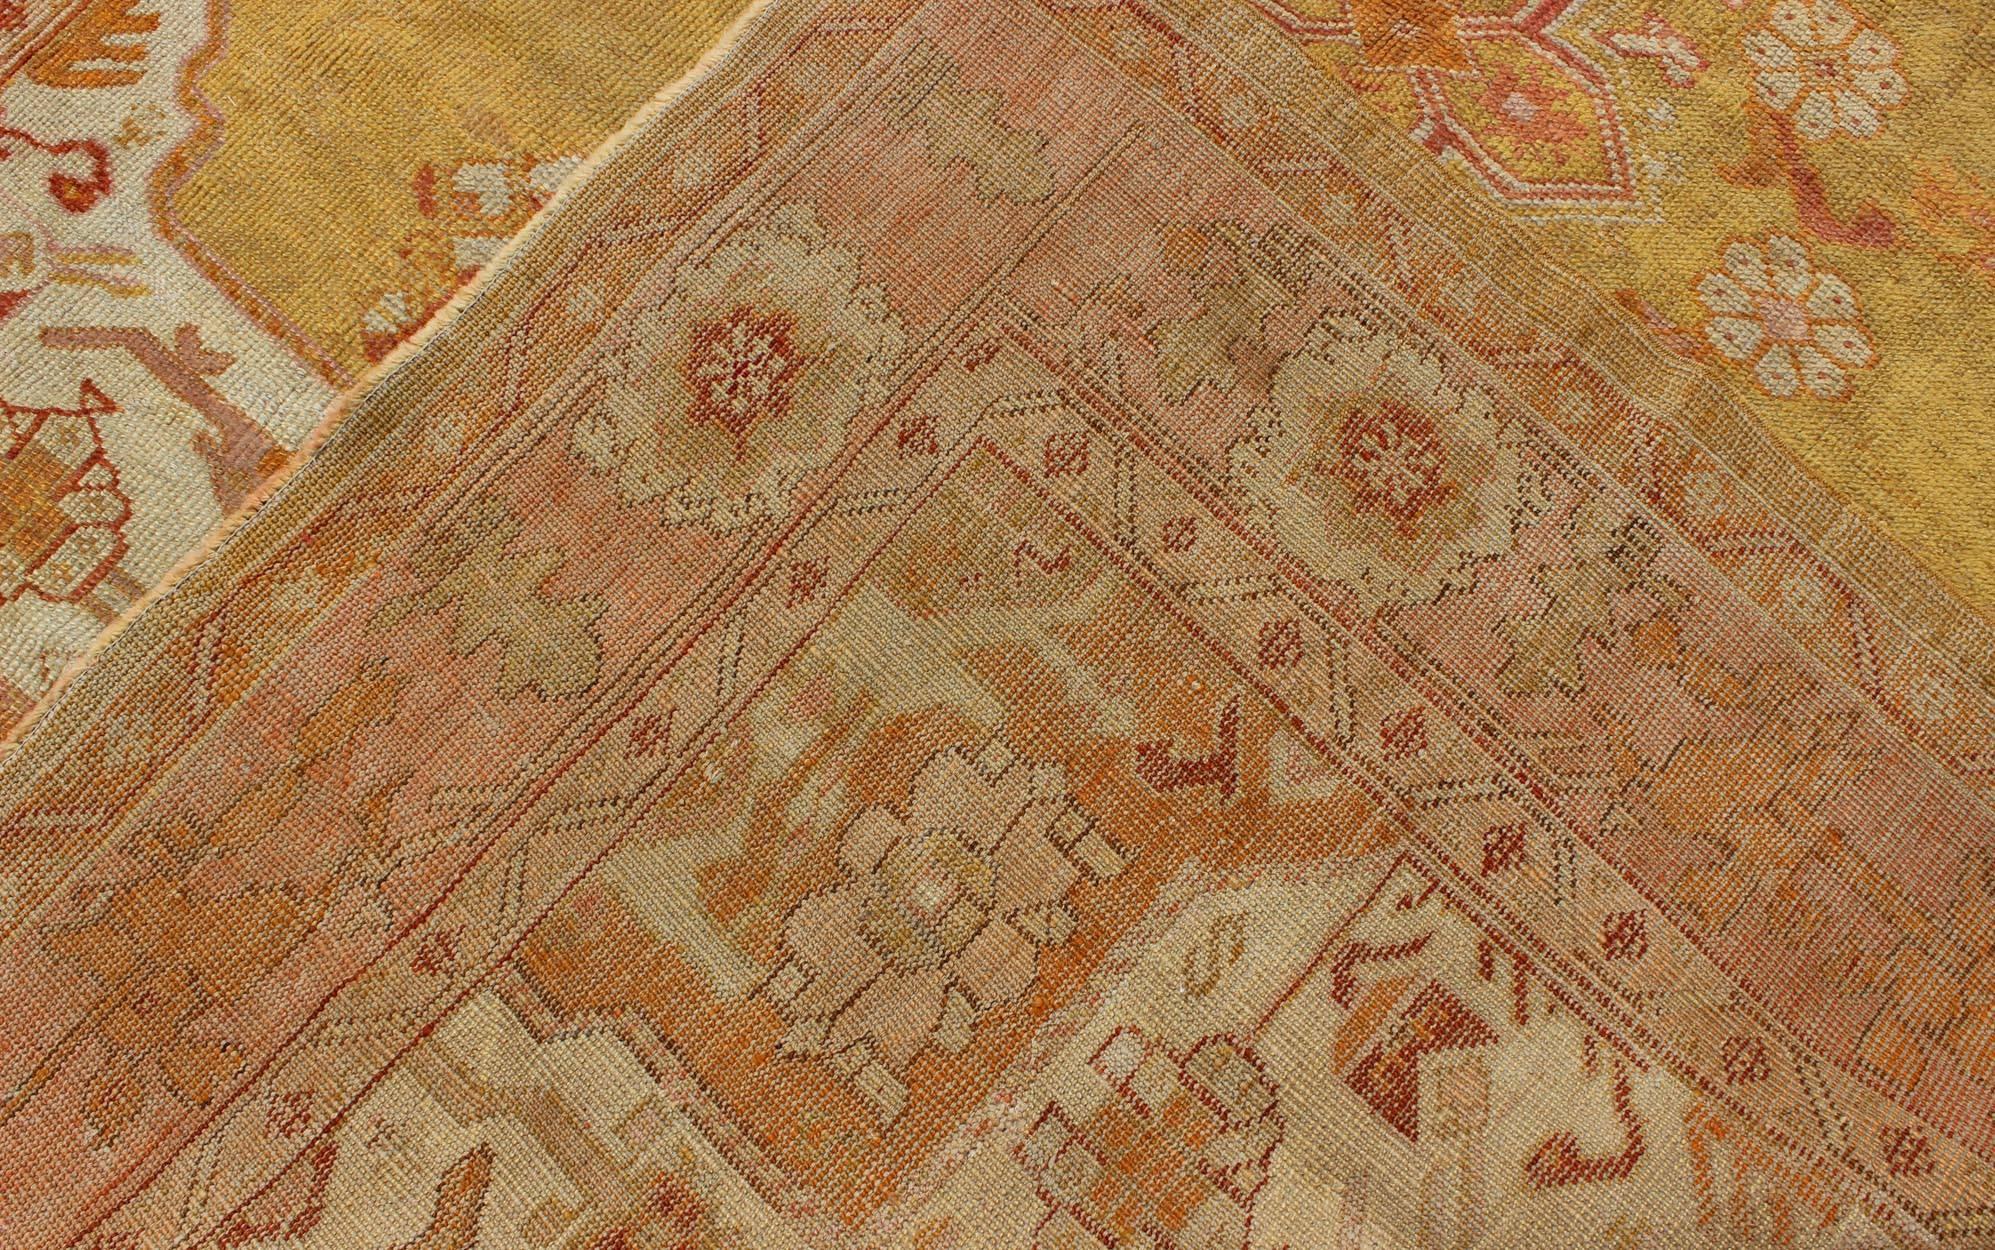 Antique Oushak Rug in Yellow Green Background, Pink Border, Red & Orange Accents In Good Condition For Sale In Atlanta, GA